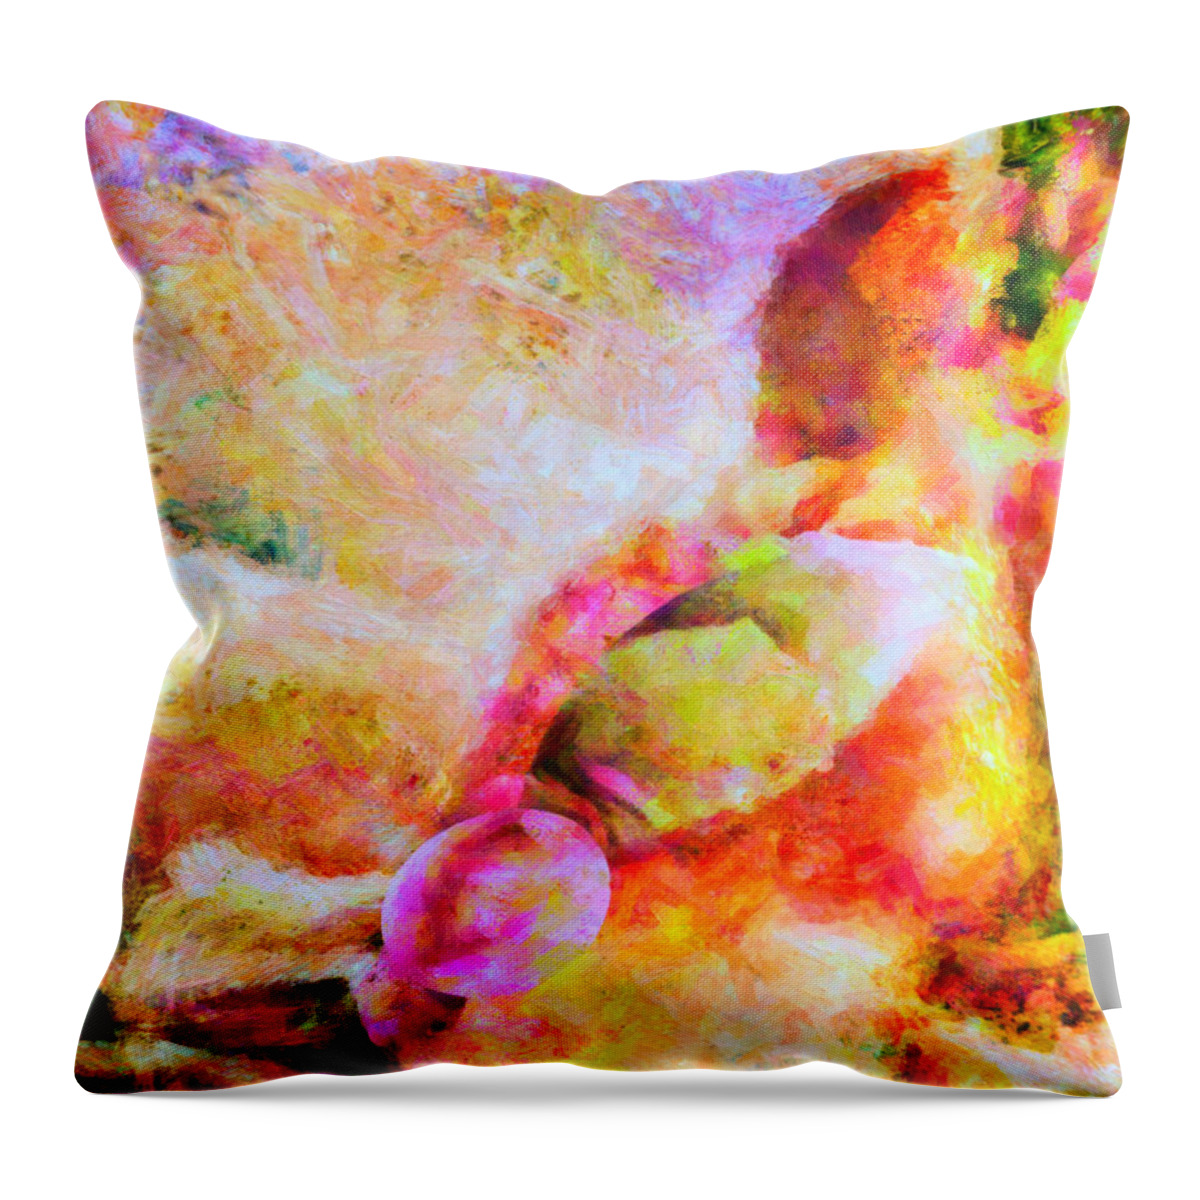 Www.themidnightstreets.net Throw Pillow featuring the painting A Summer Afternoon Love by Joe Misrasi